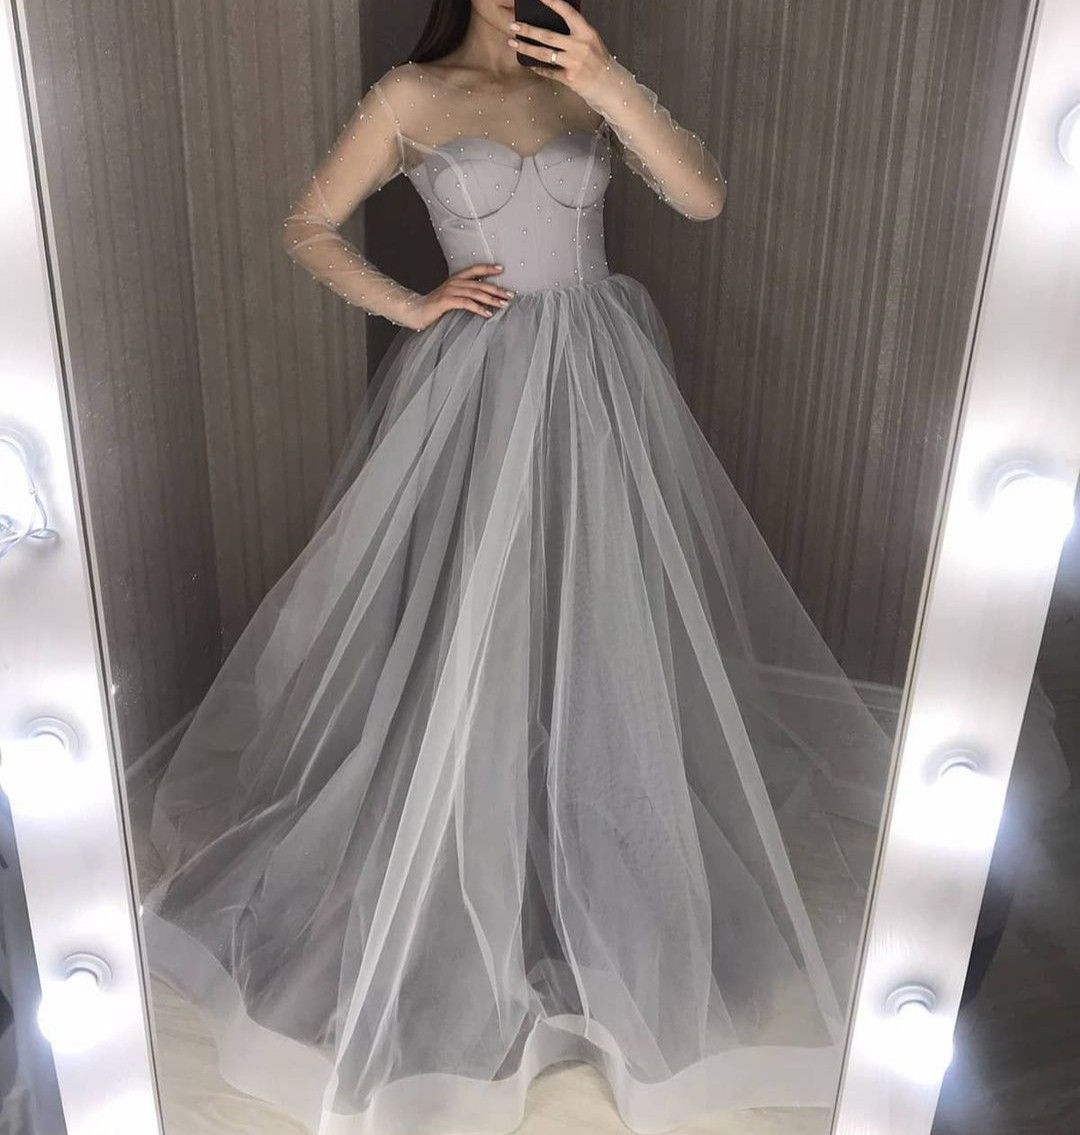 Long Sleeves Evening Dresses Grey A-Line Pearls Tulle Long Prom Dresses